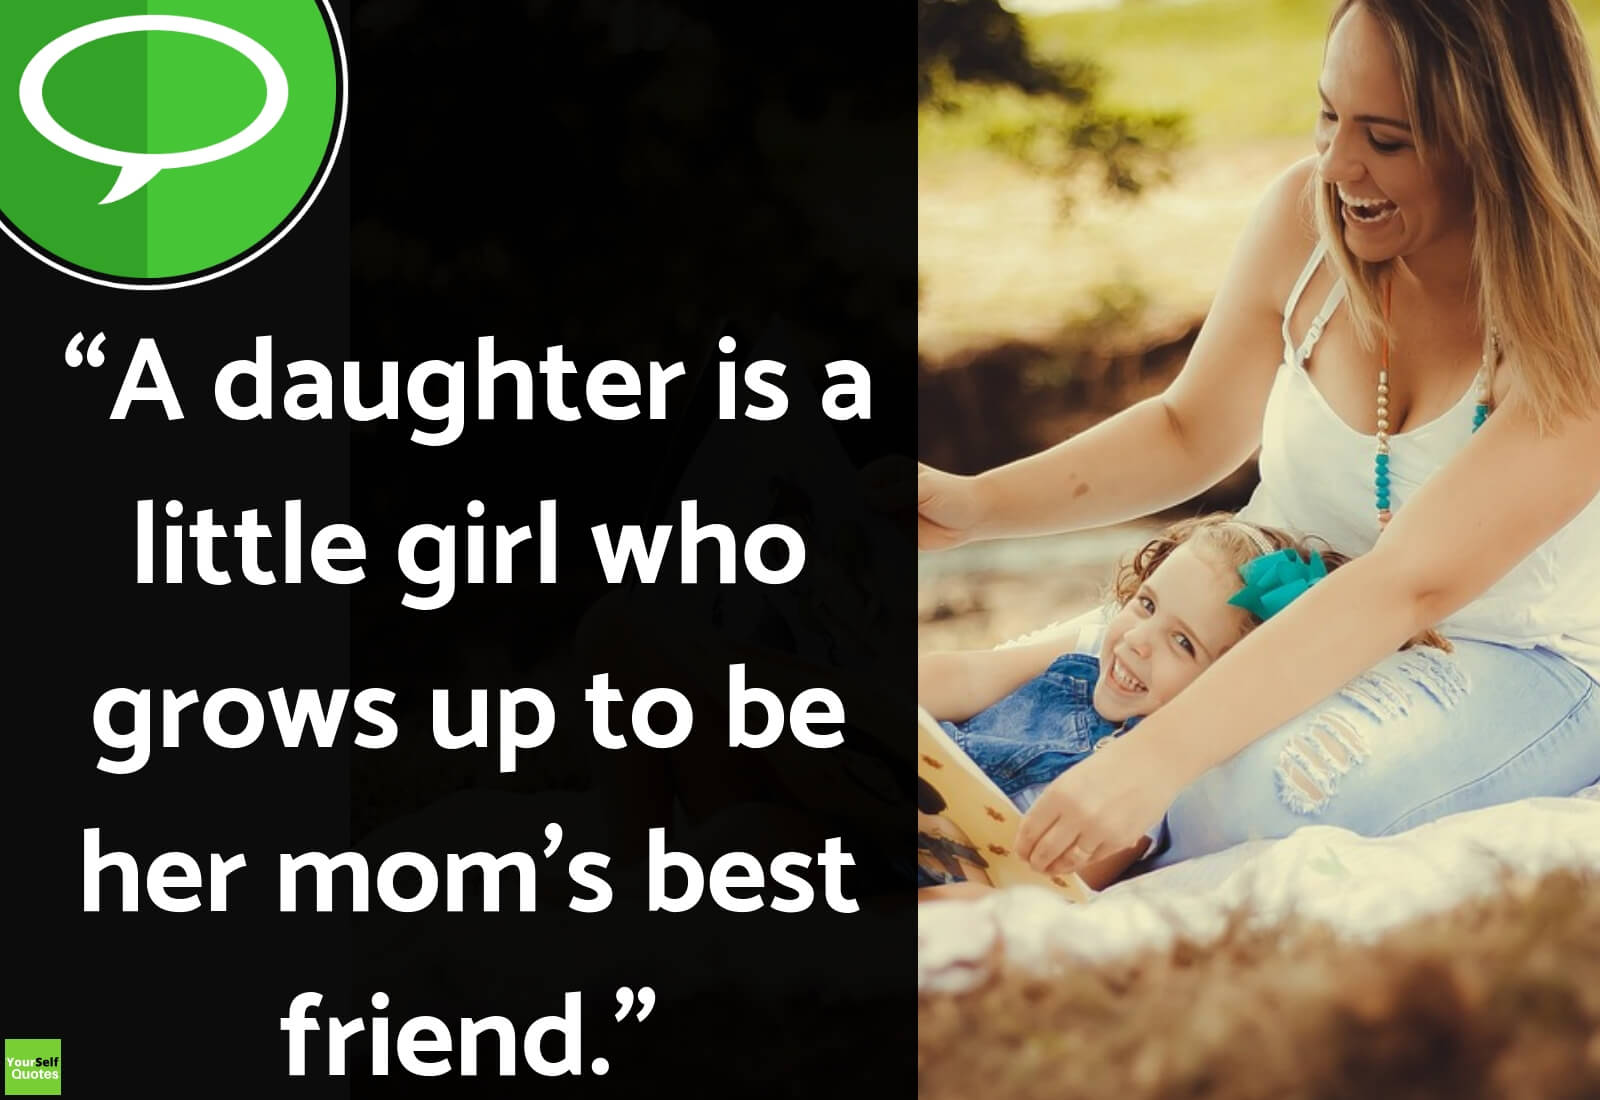 Top Inspiring MotherDaughter Relationship Quotes with Images